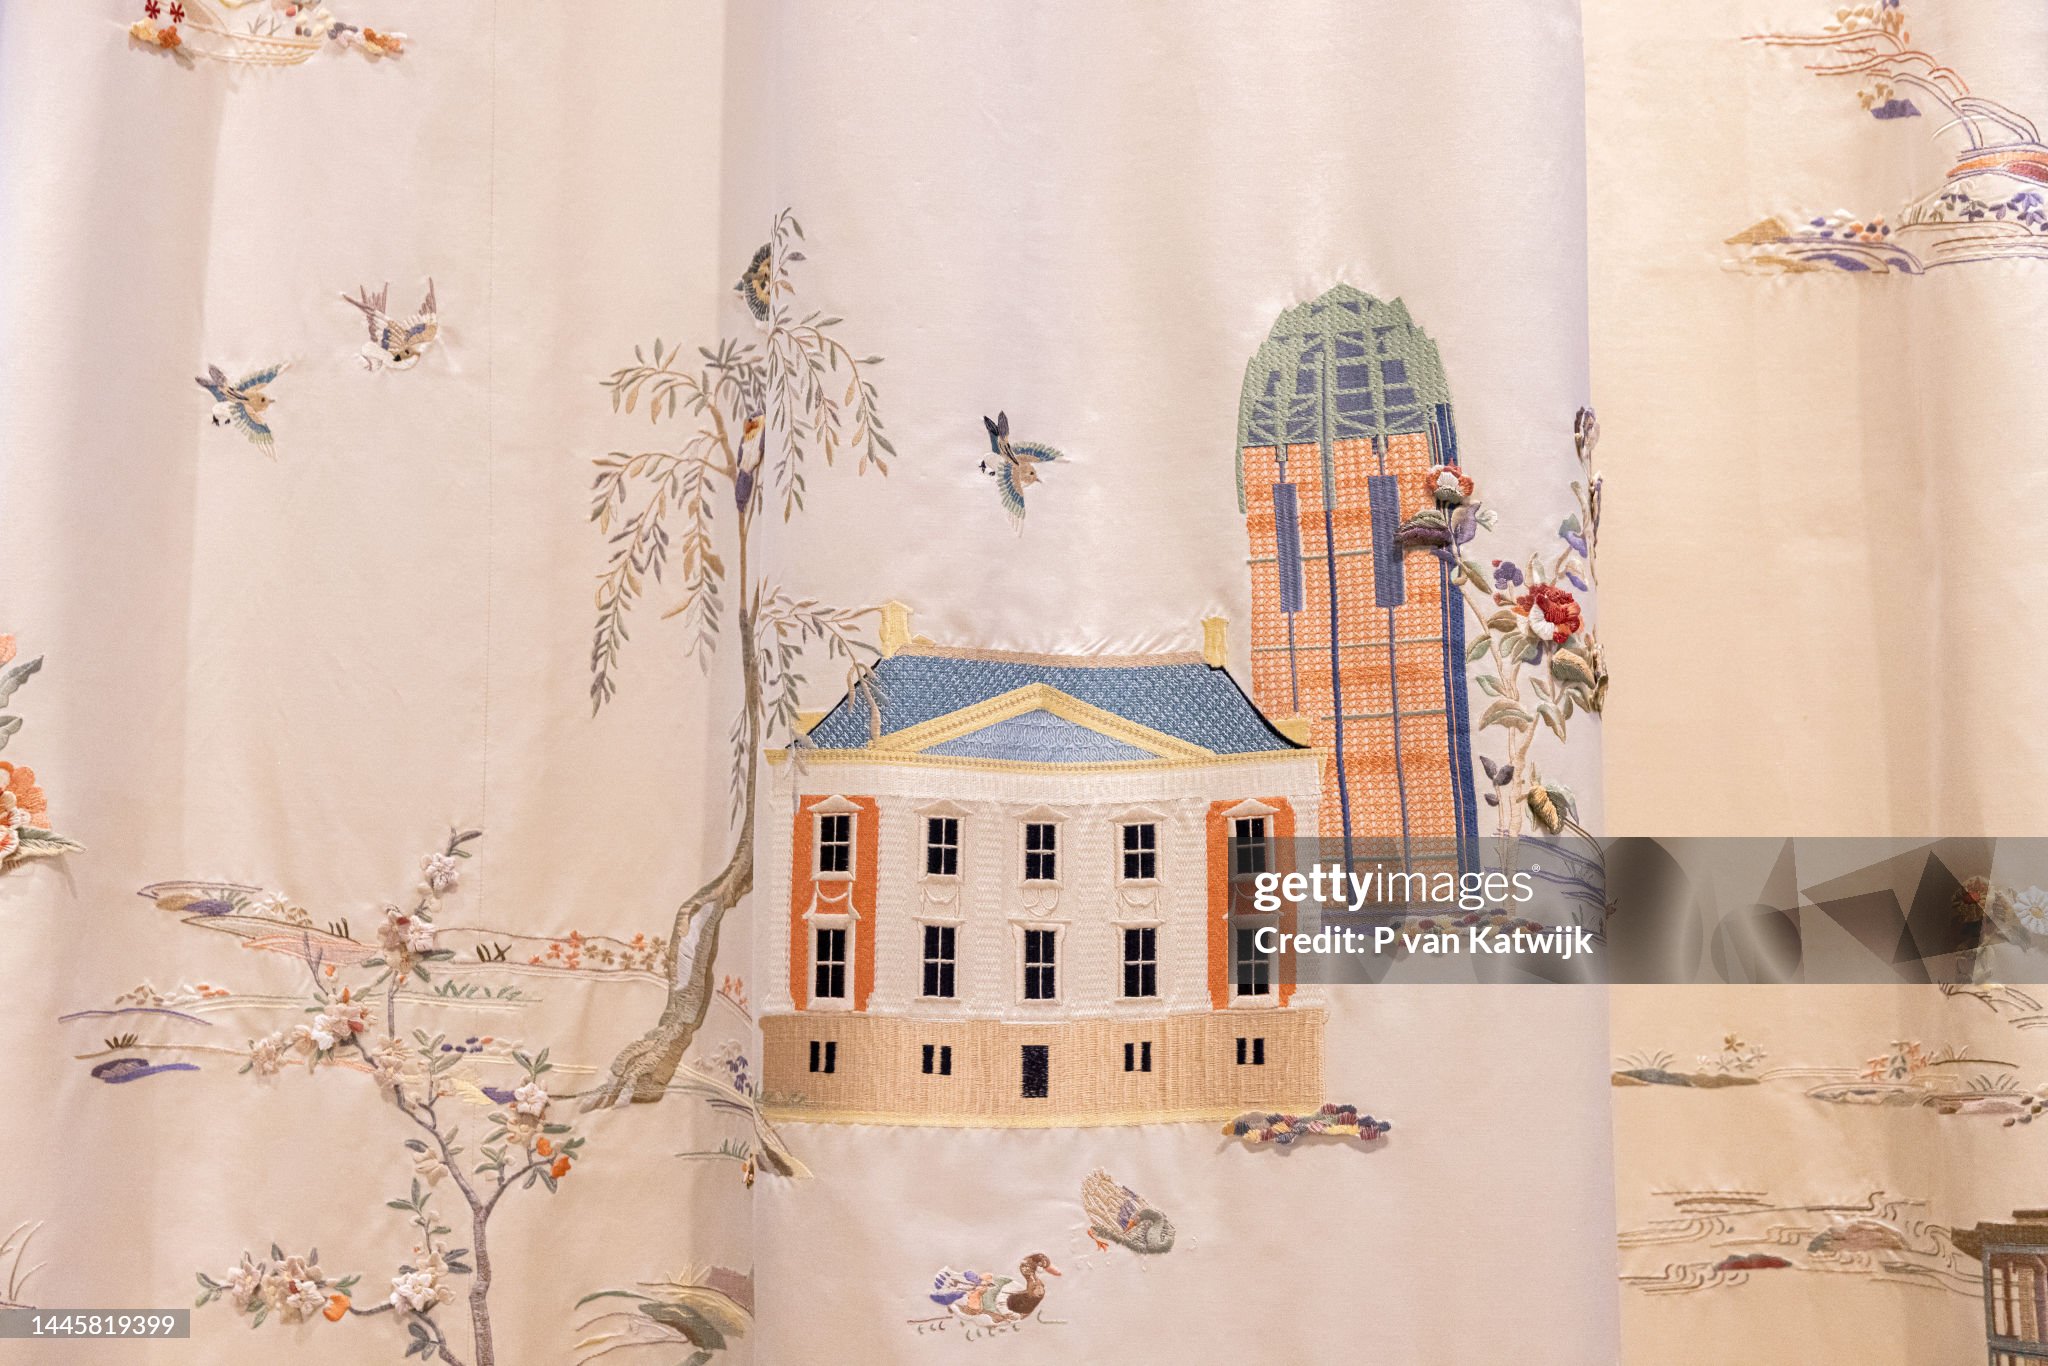 queen-maxima-of-the-netherlands-visits-textile-museum-to-present-her-new-curtains-for-palace.jpg?s=2048x2048&w=gi&k=20&c=2ujwgeCLDsb2PsoqHePo3c9Mcg3vwblsFYSpgpSSPTs=